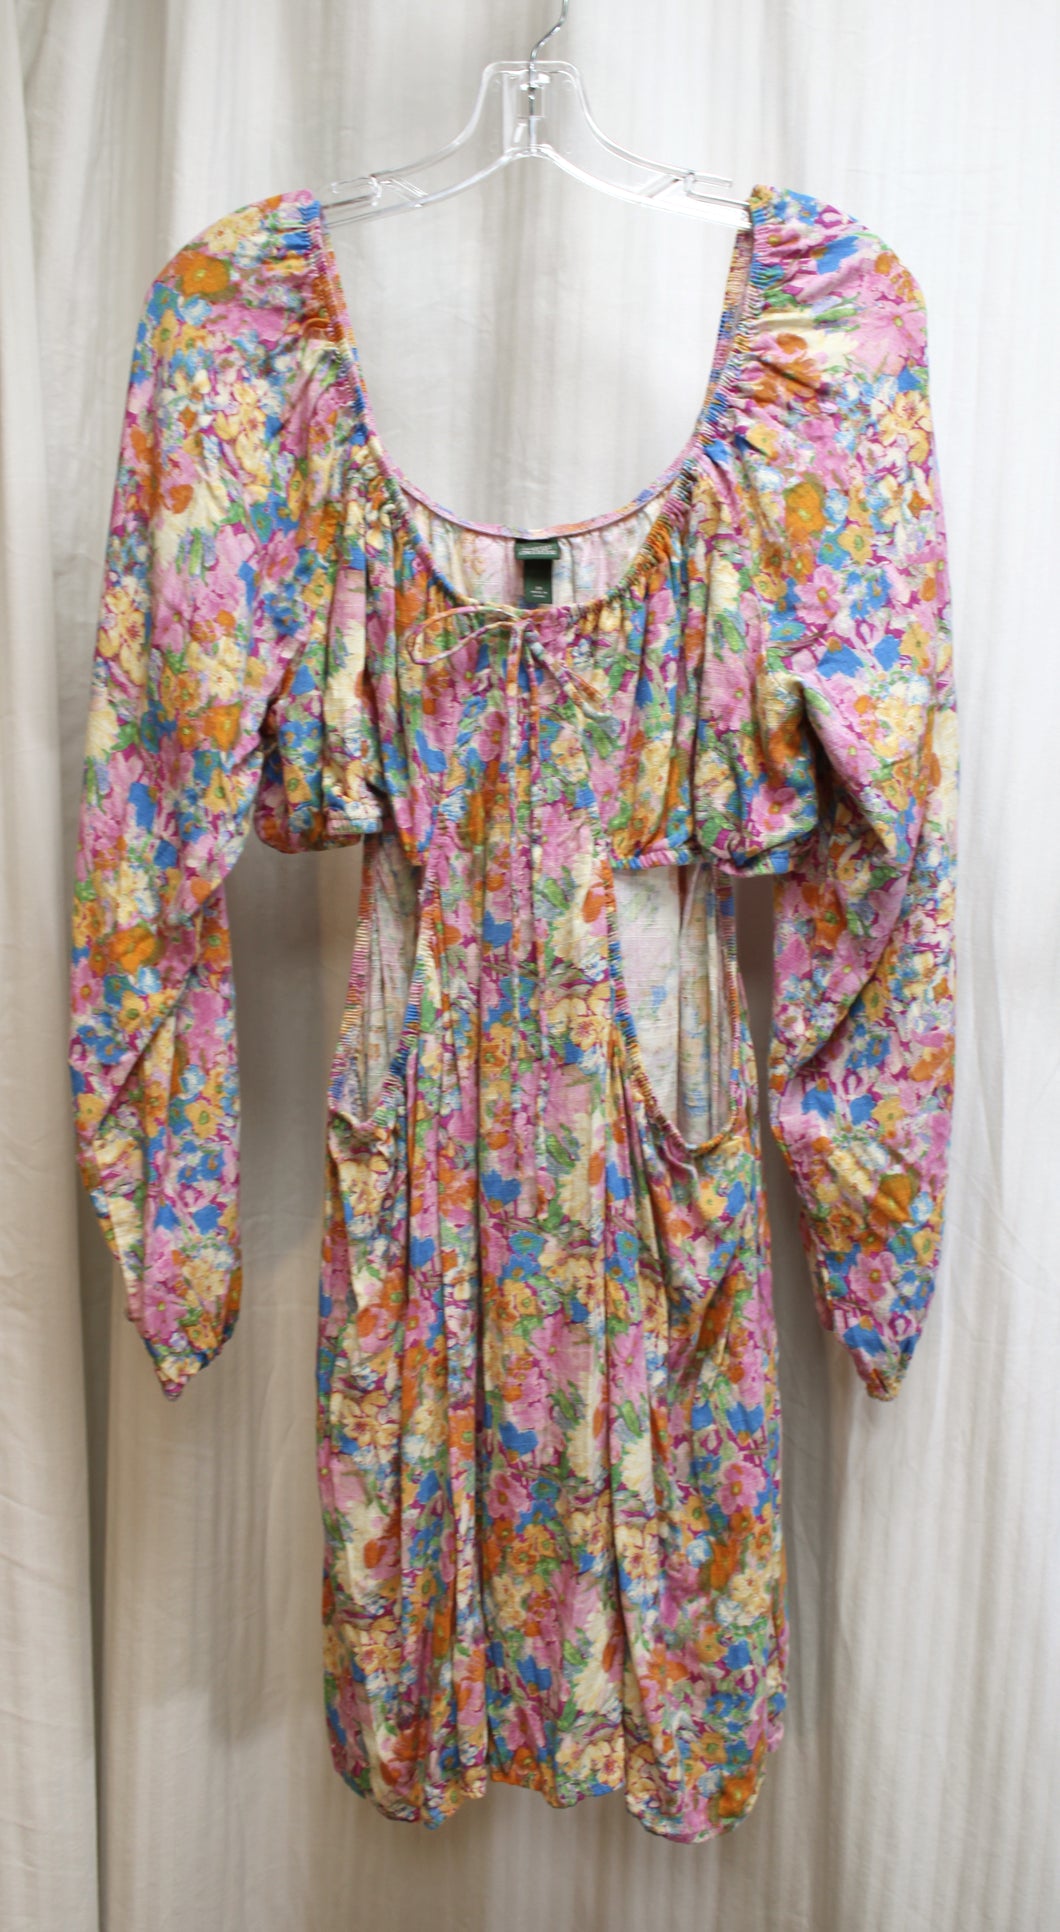 Wild Fable - Long Sleeve Scoop Neck, Peek-a-Boo SIdes Water Color Floral Rayon/Linen Mini Dress - Size 2X